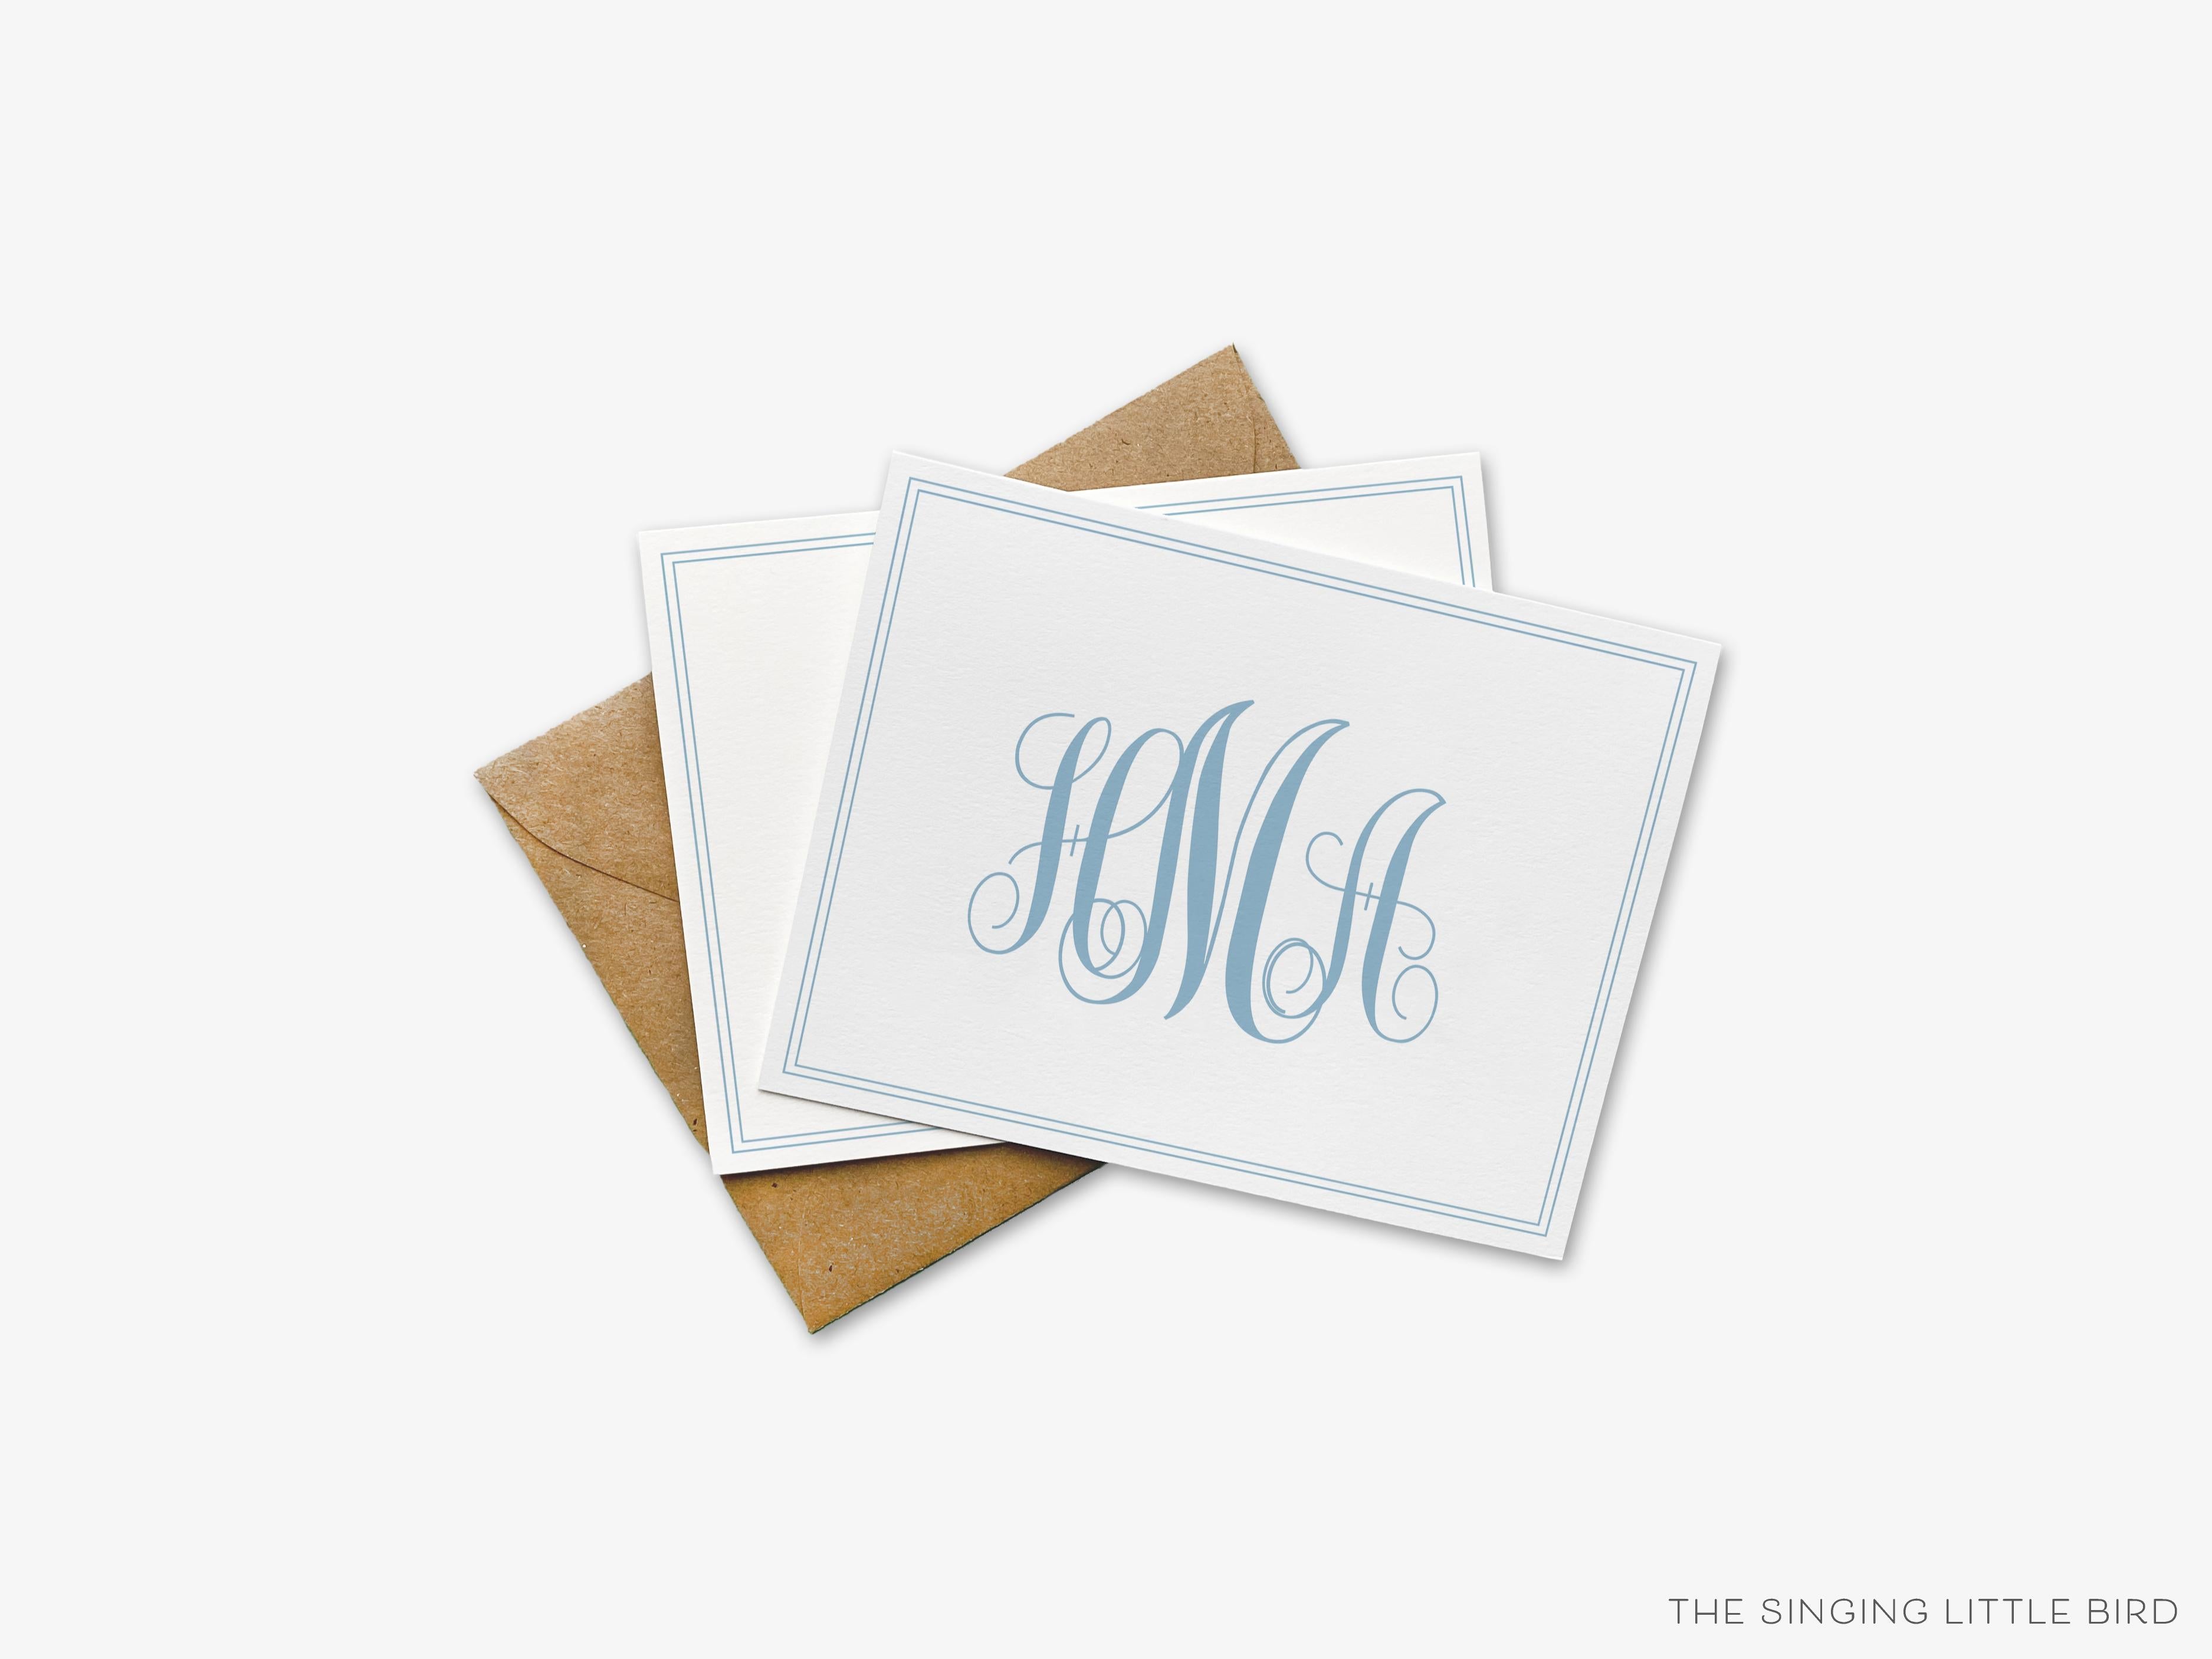 Curly Monogram Greeting Cards-These folded greeting cards are 4.25x5.5 and feature our hand-painted curly print, printed in the USA on 100lb textured stock. They come with a White or Kraft envelope and make a great thank you or just because card personalized with your monogram.-The Singing Little Bird